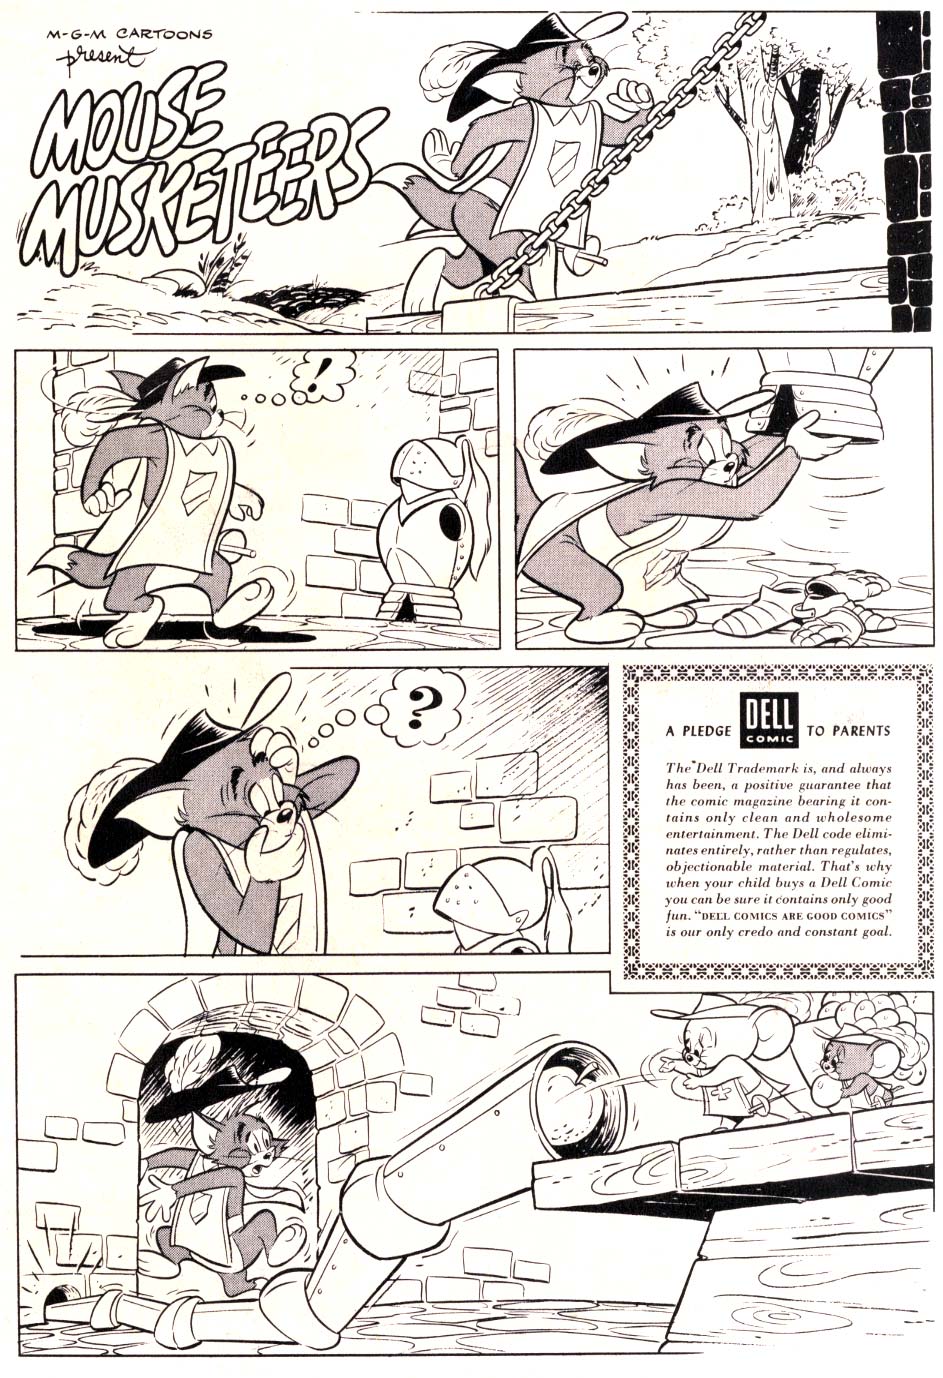 Read online M.G.M's The Mouse Musketeers comic -  Issue #12 - 35